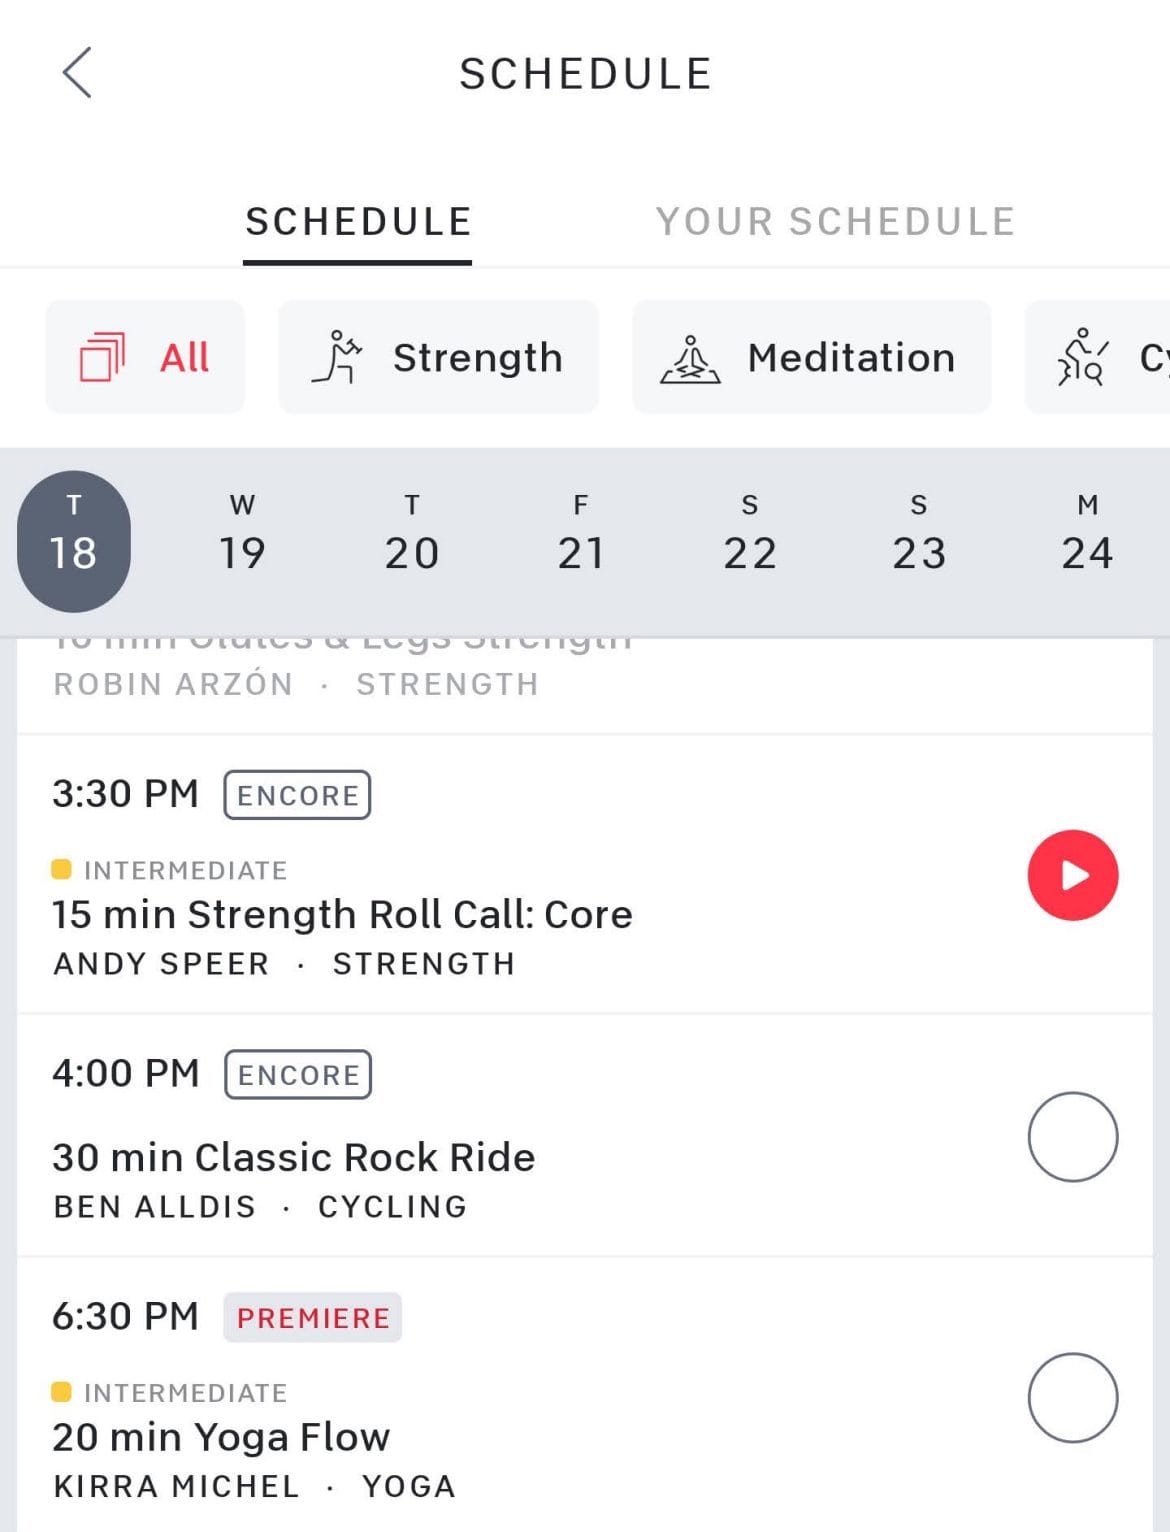 Peloton upcoming schedule showing "premiere" tag.